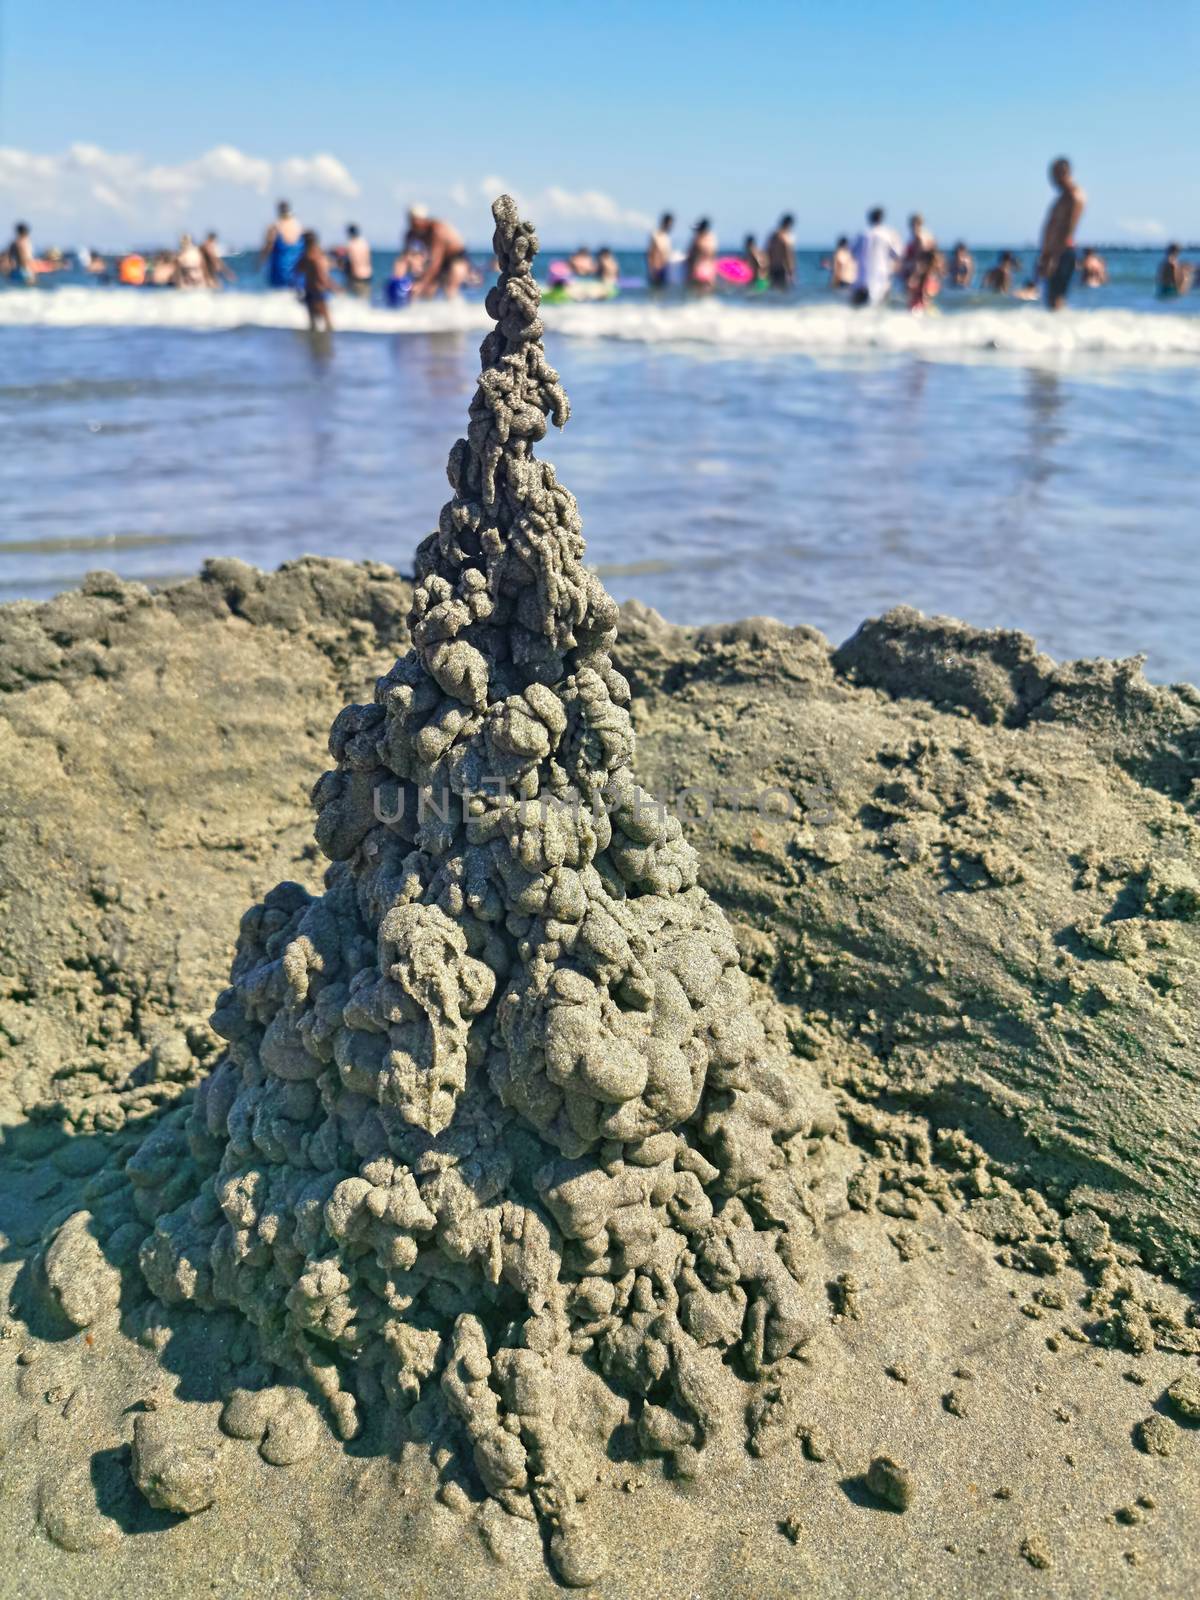 Sand castle and crowded beach background by savcoco